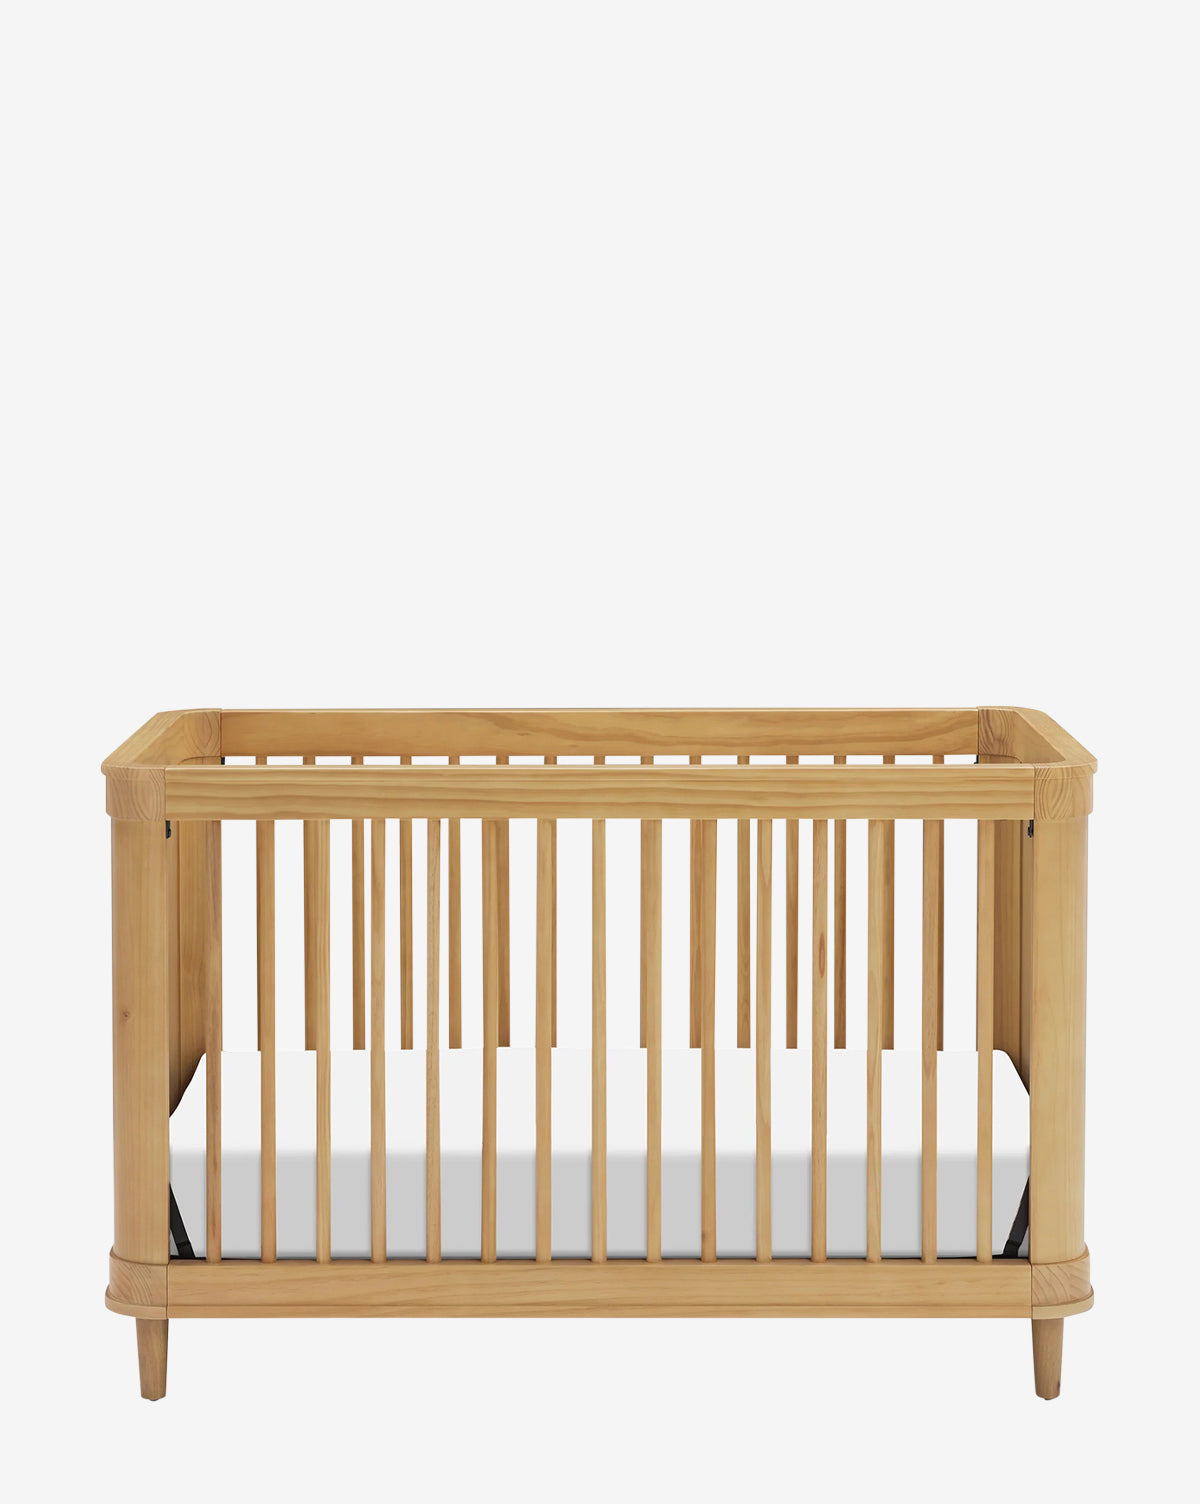 Million Dollar Baby, Marin with Cane 3-in-1 Convertible Crib